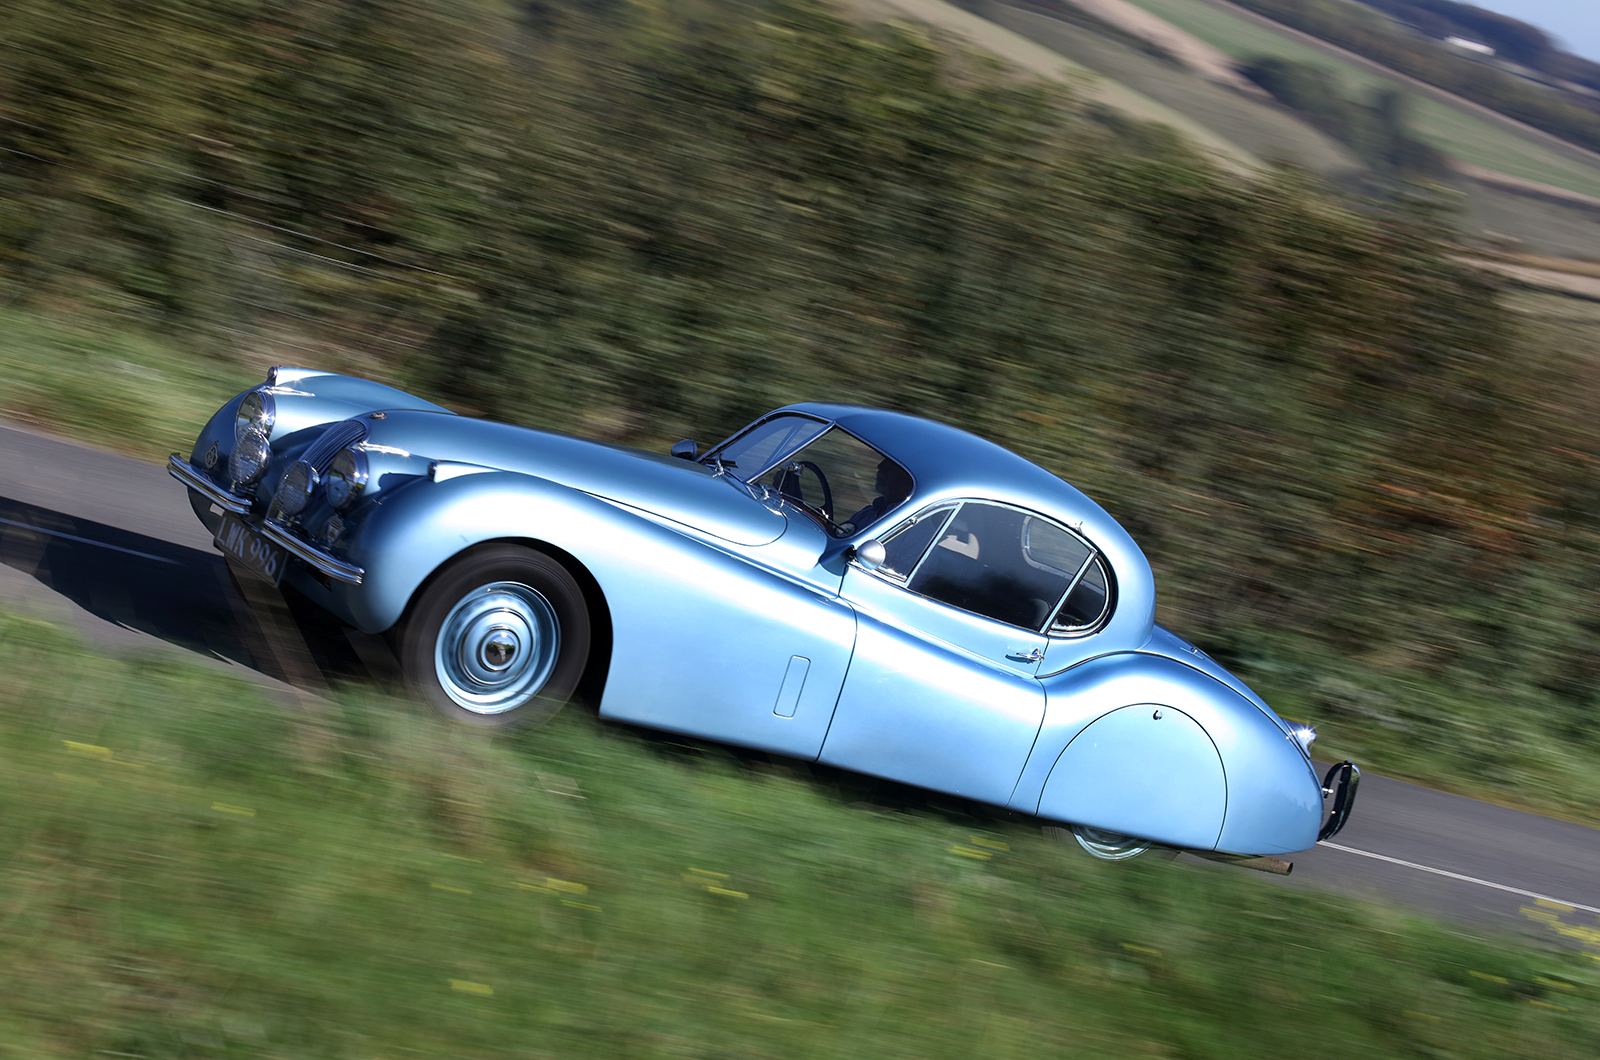 Classic & Sports Car – This XK120 is the rare Jaguar you’ve never heard of